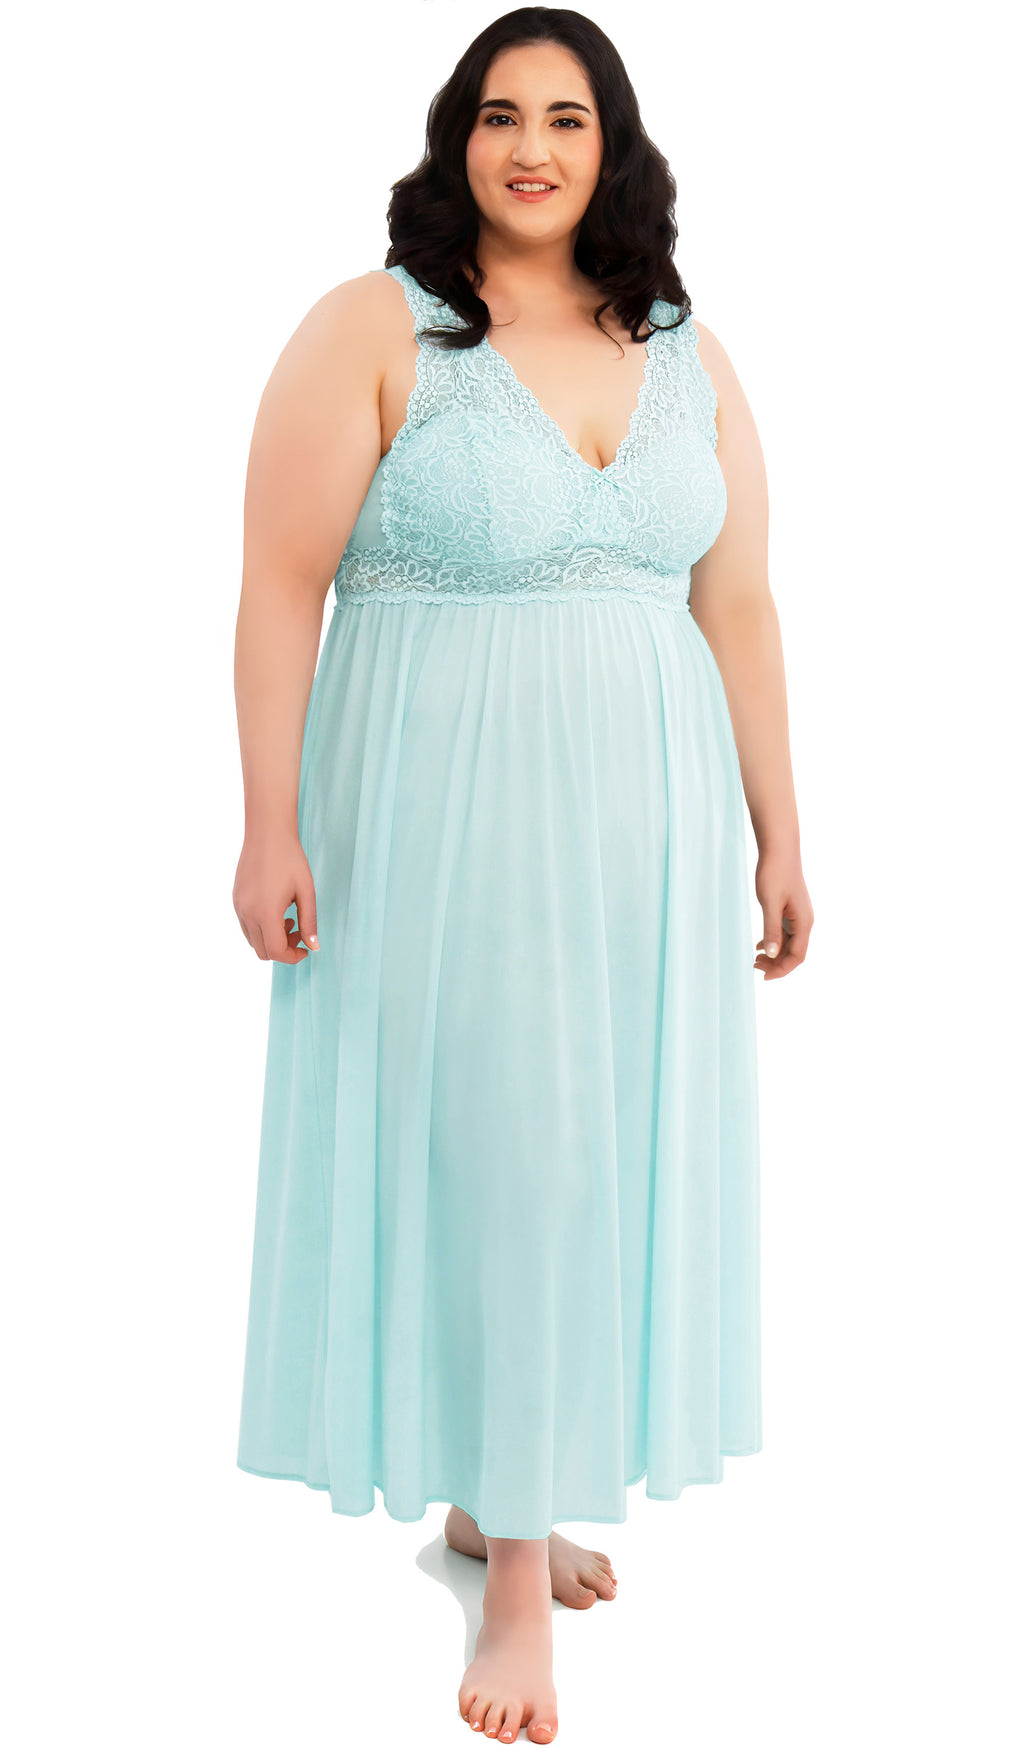 Exquisite Form - Women's Sleeveless Short Nightgown - Style 30107 